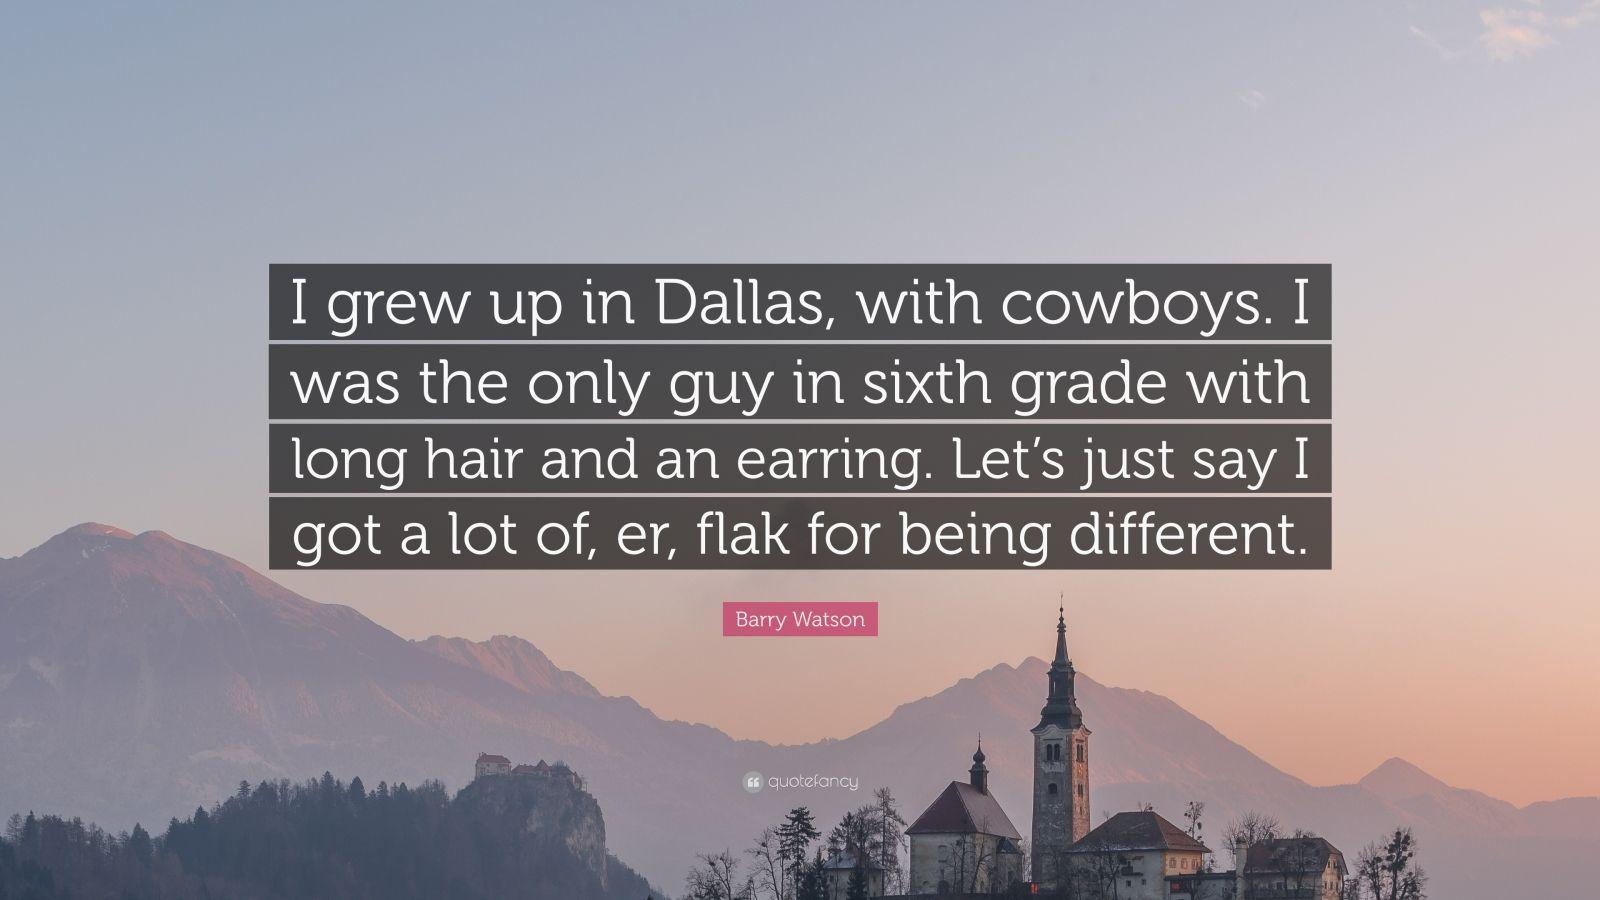 Barry Watson Quote: “I grew up in Dallas, with cowboys. I was